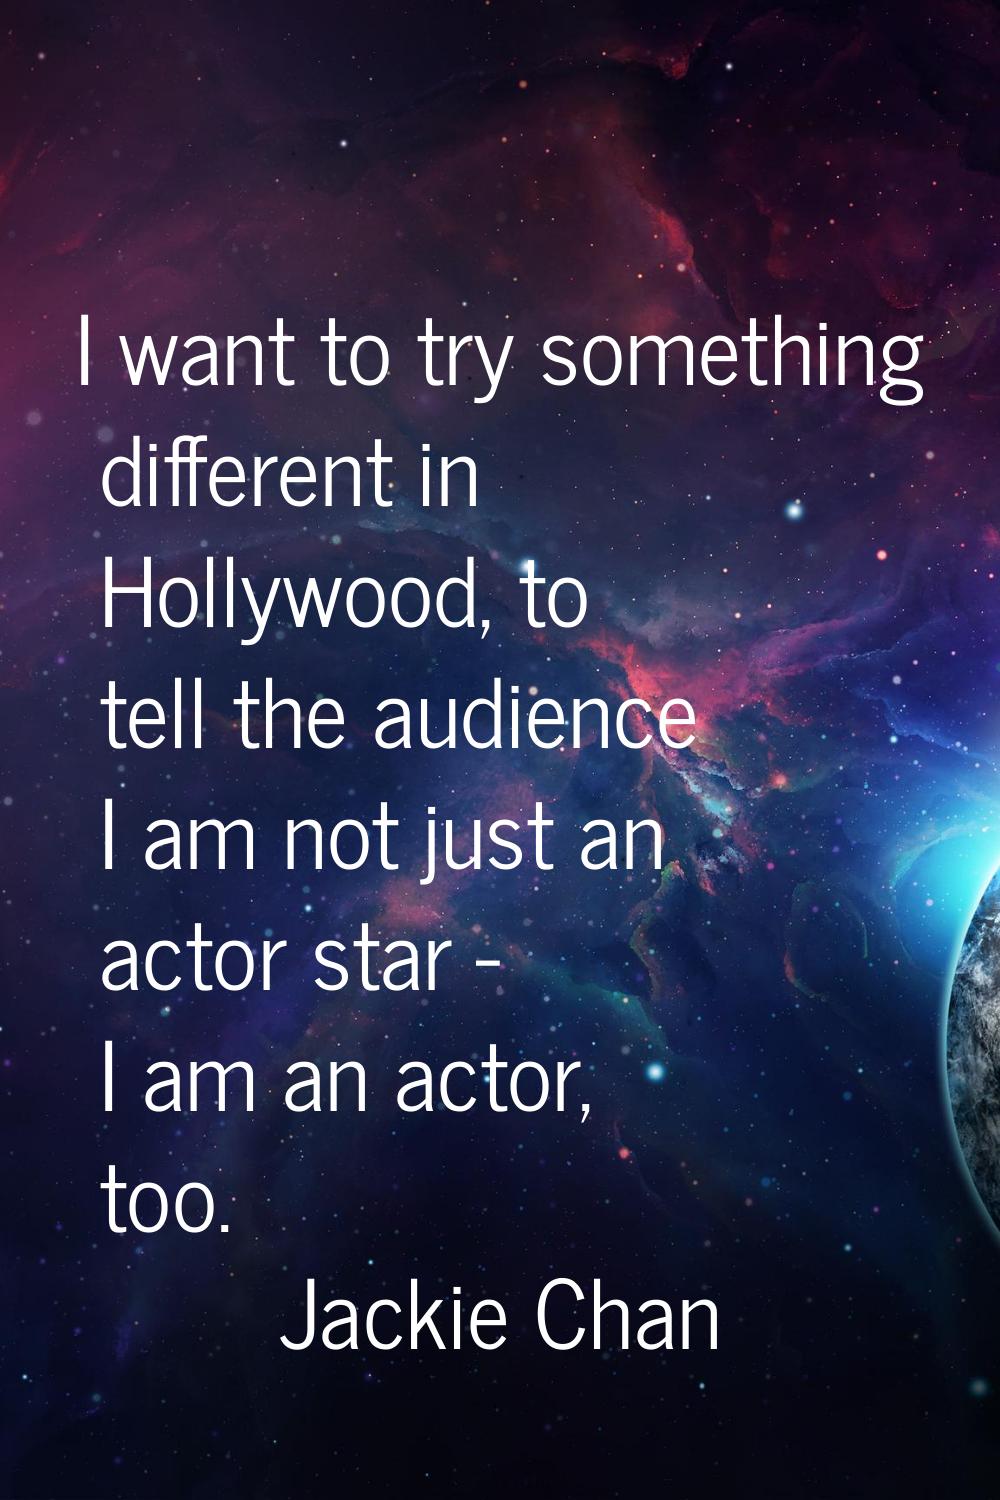 I want to try something different in Hollywood, to tell the audience I am not just an actor star - 